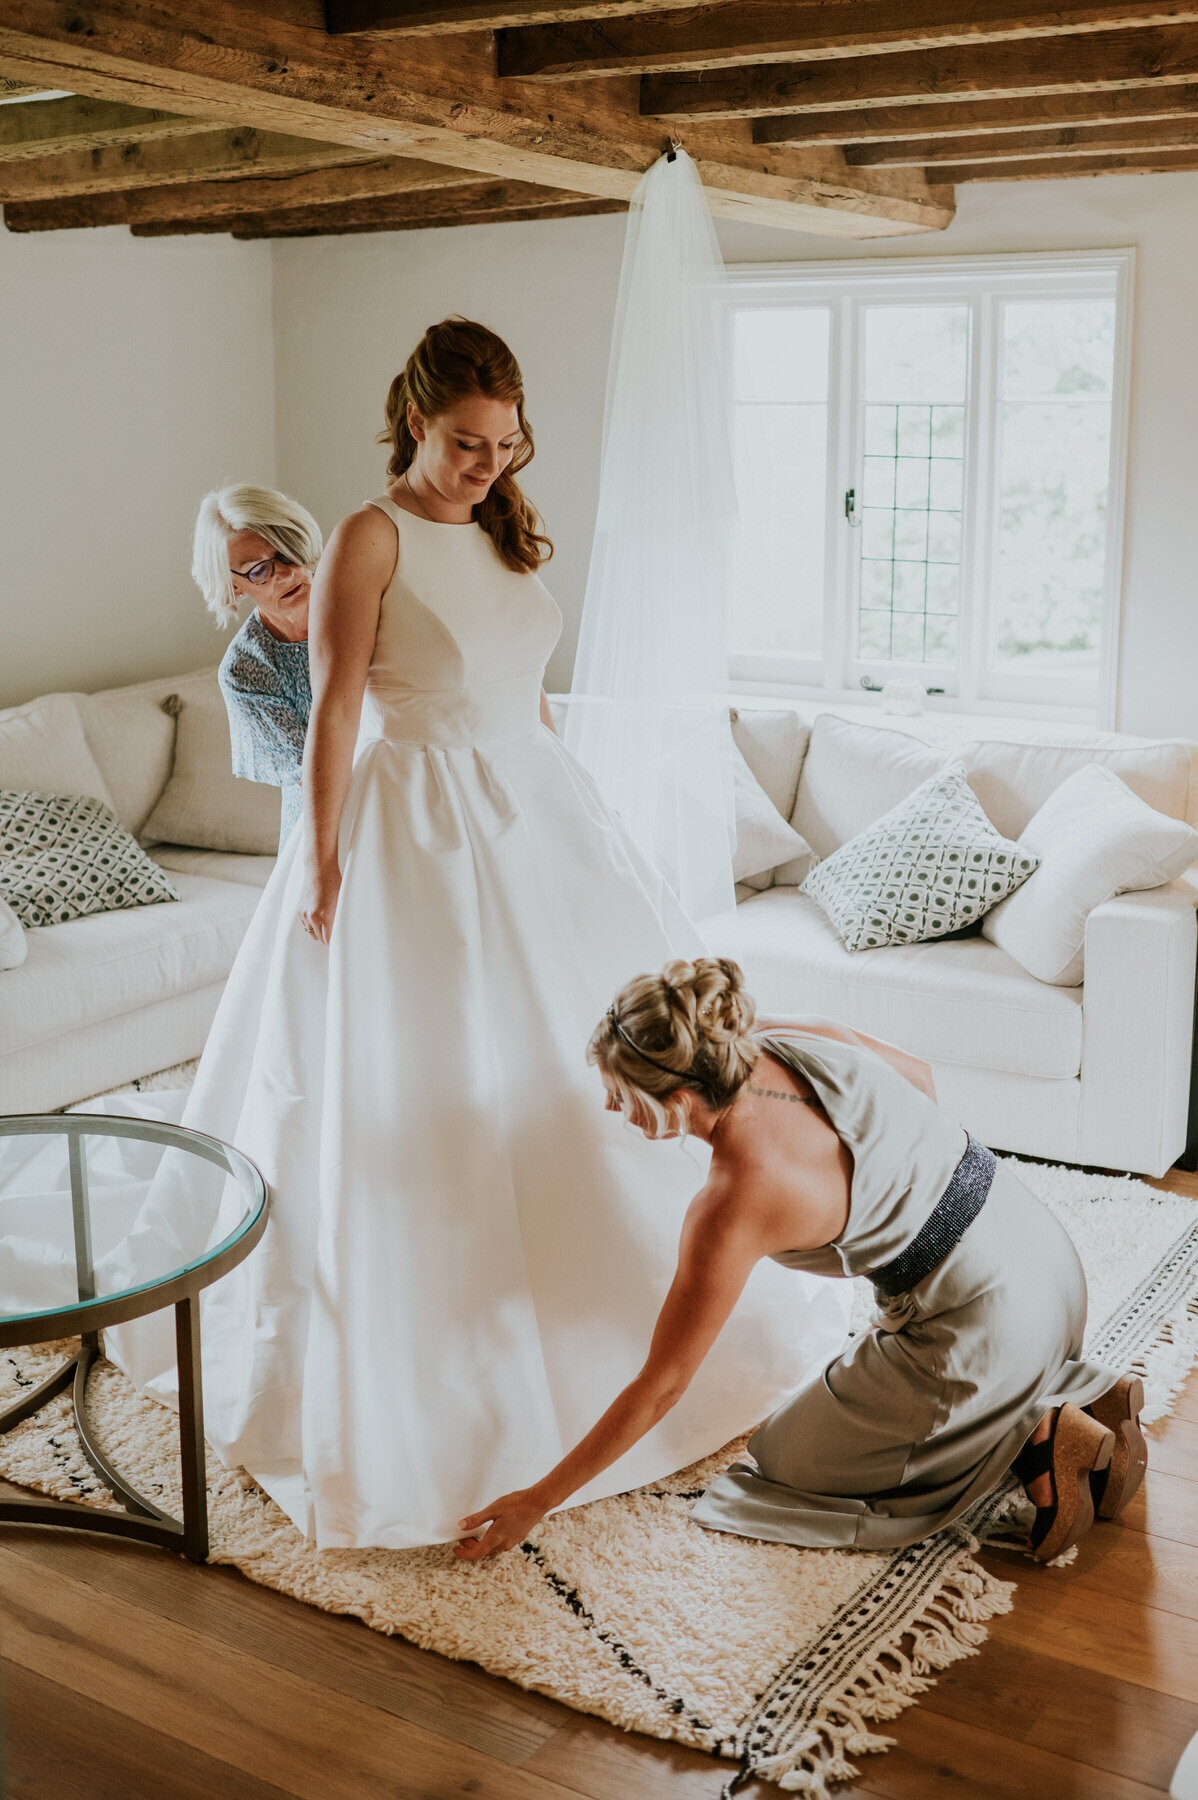 Bridesmaid and mother of the bride adjusting brides dress